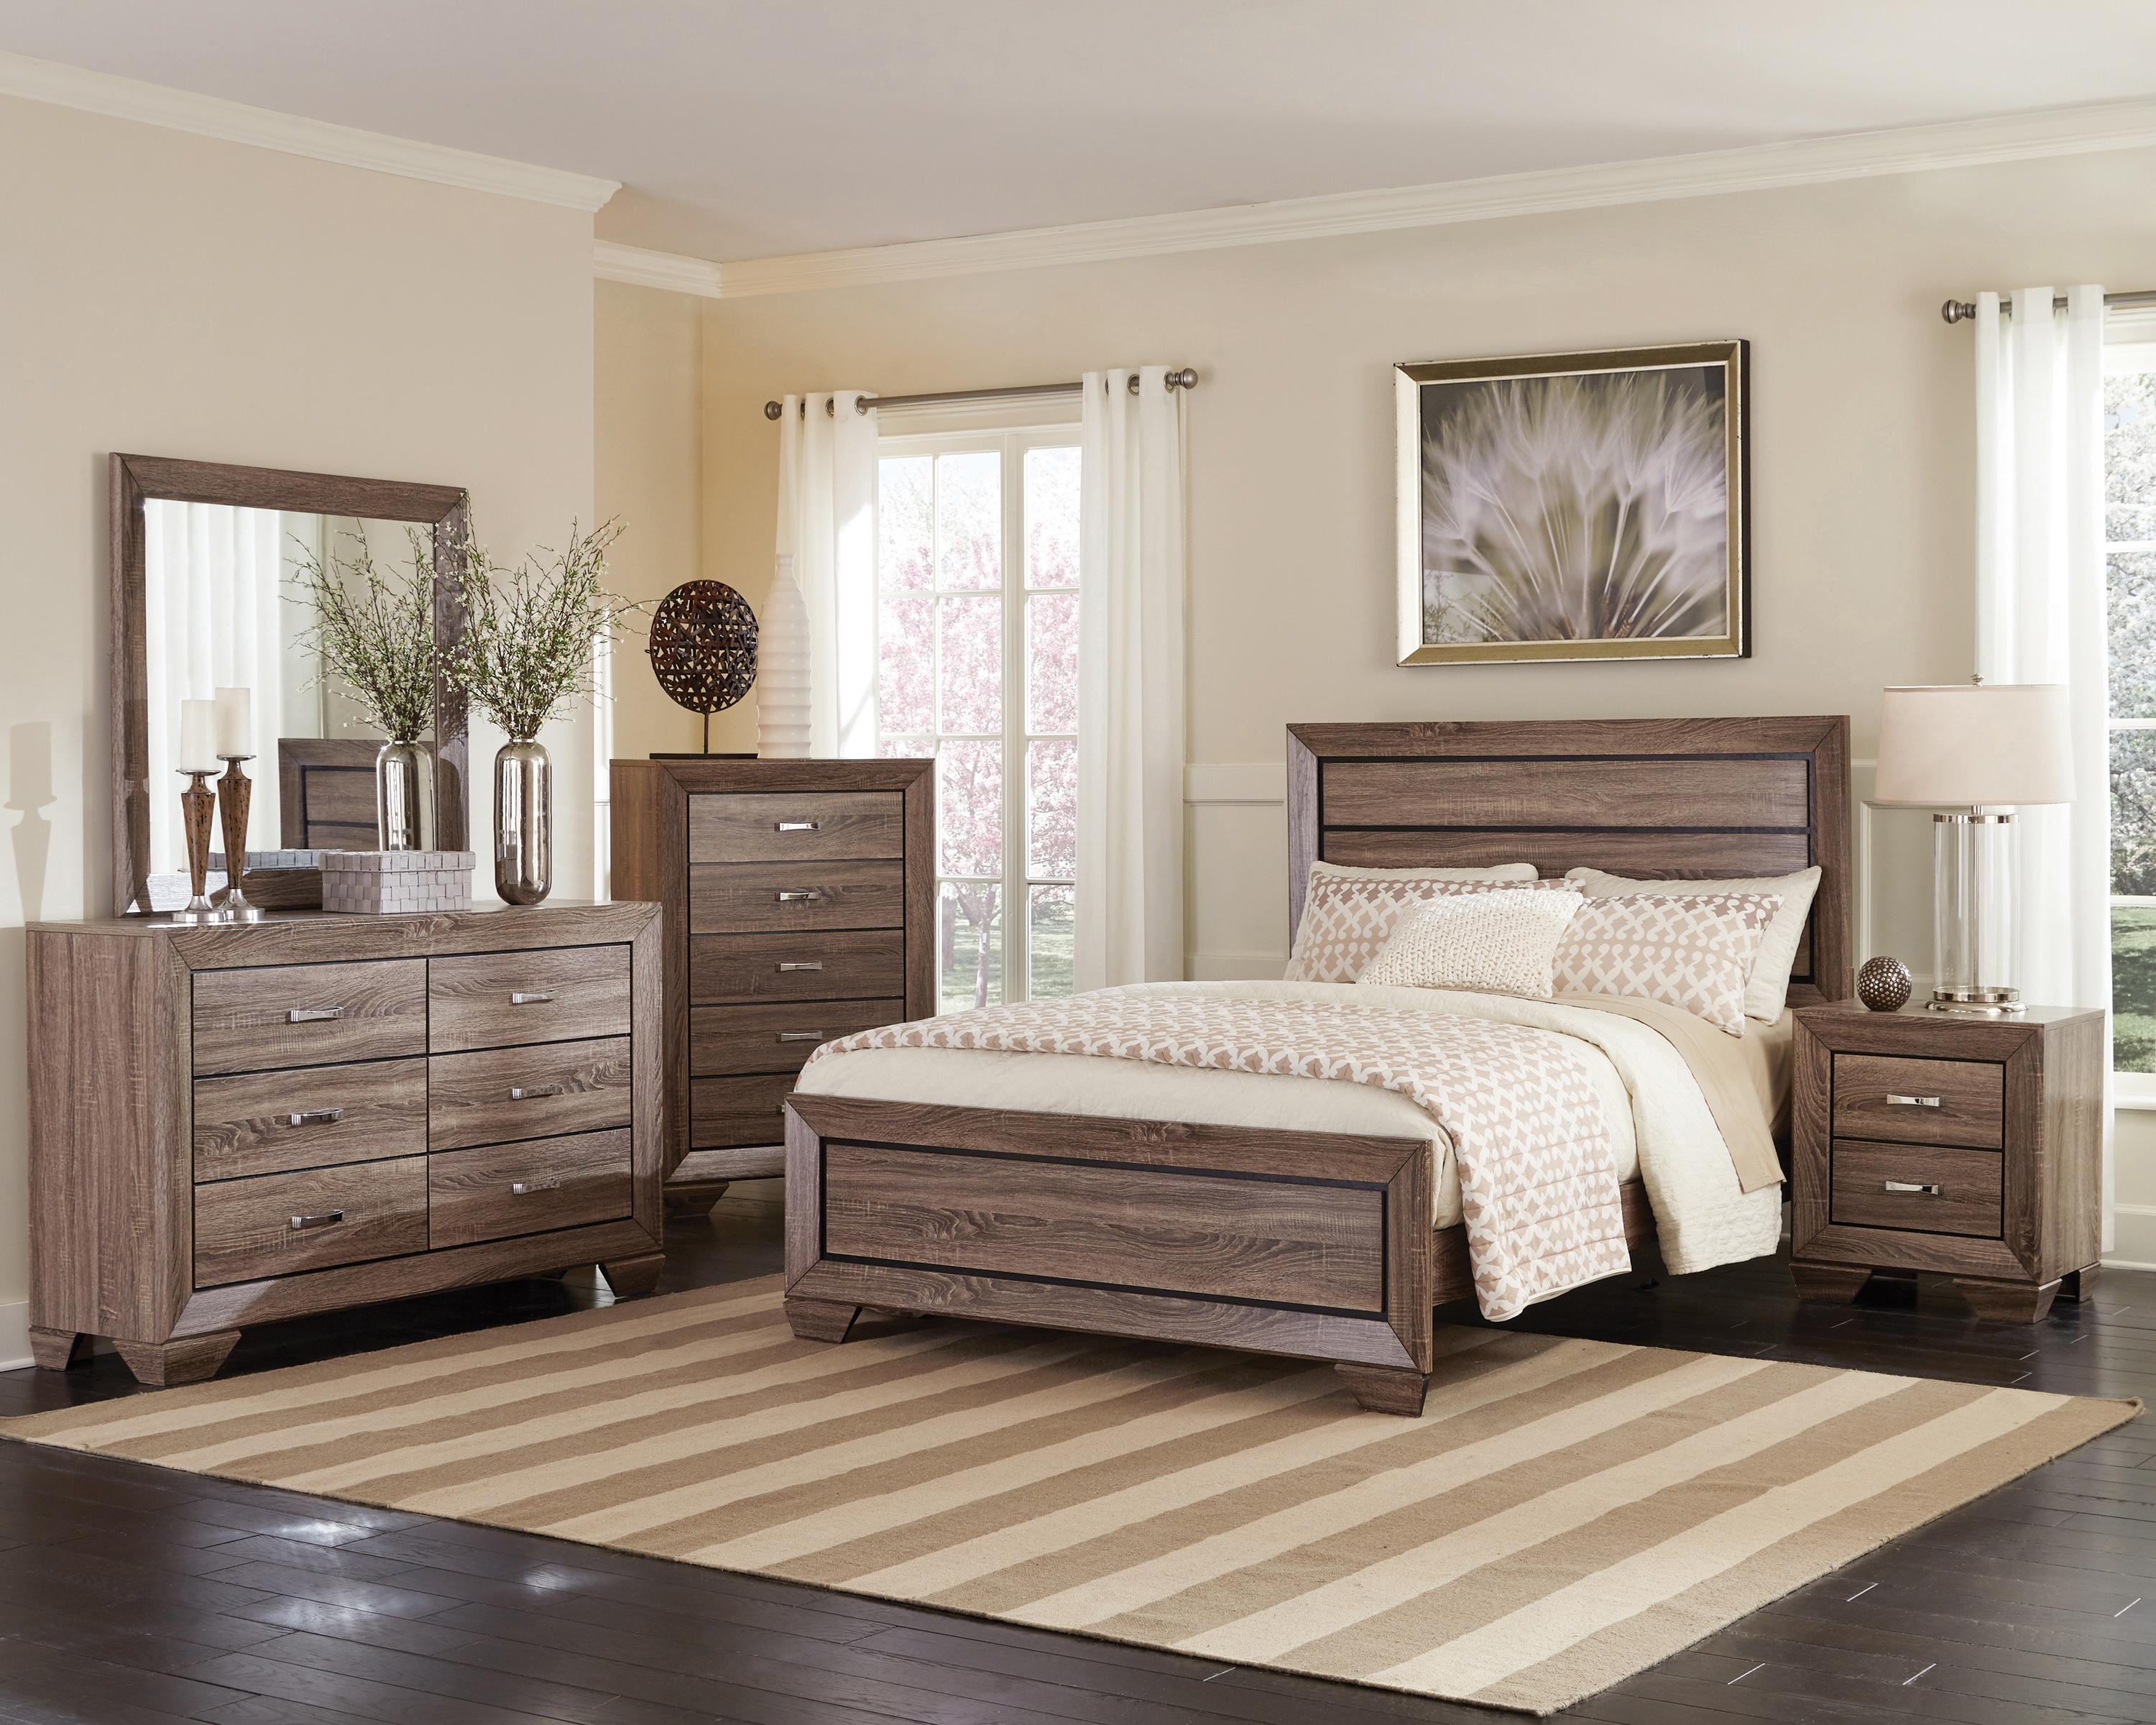 Transitional Bedroom Set 204190Q-5PC Kauffman 204190Q-5PC in Taupe 